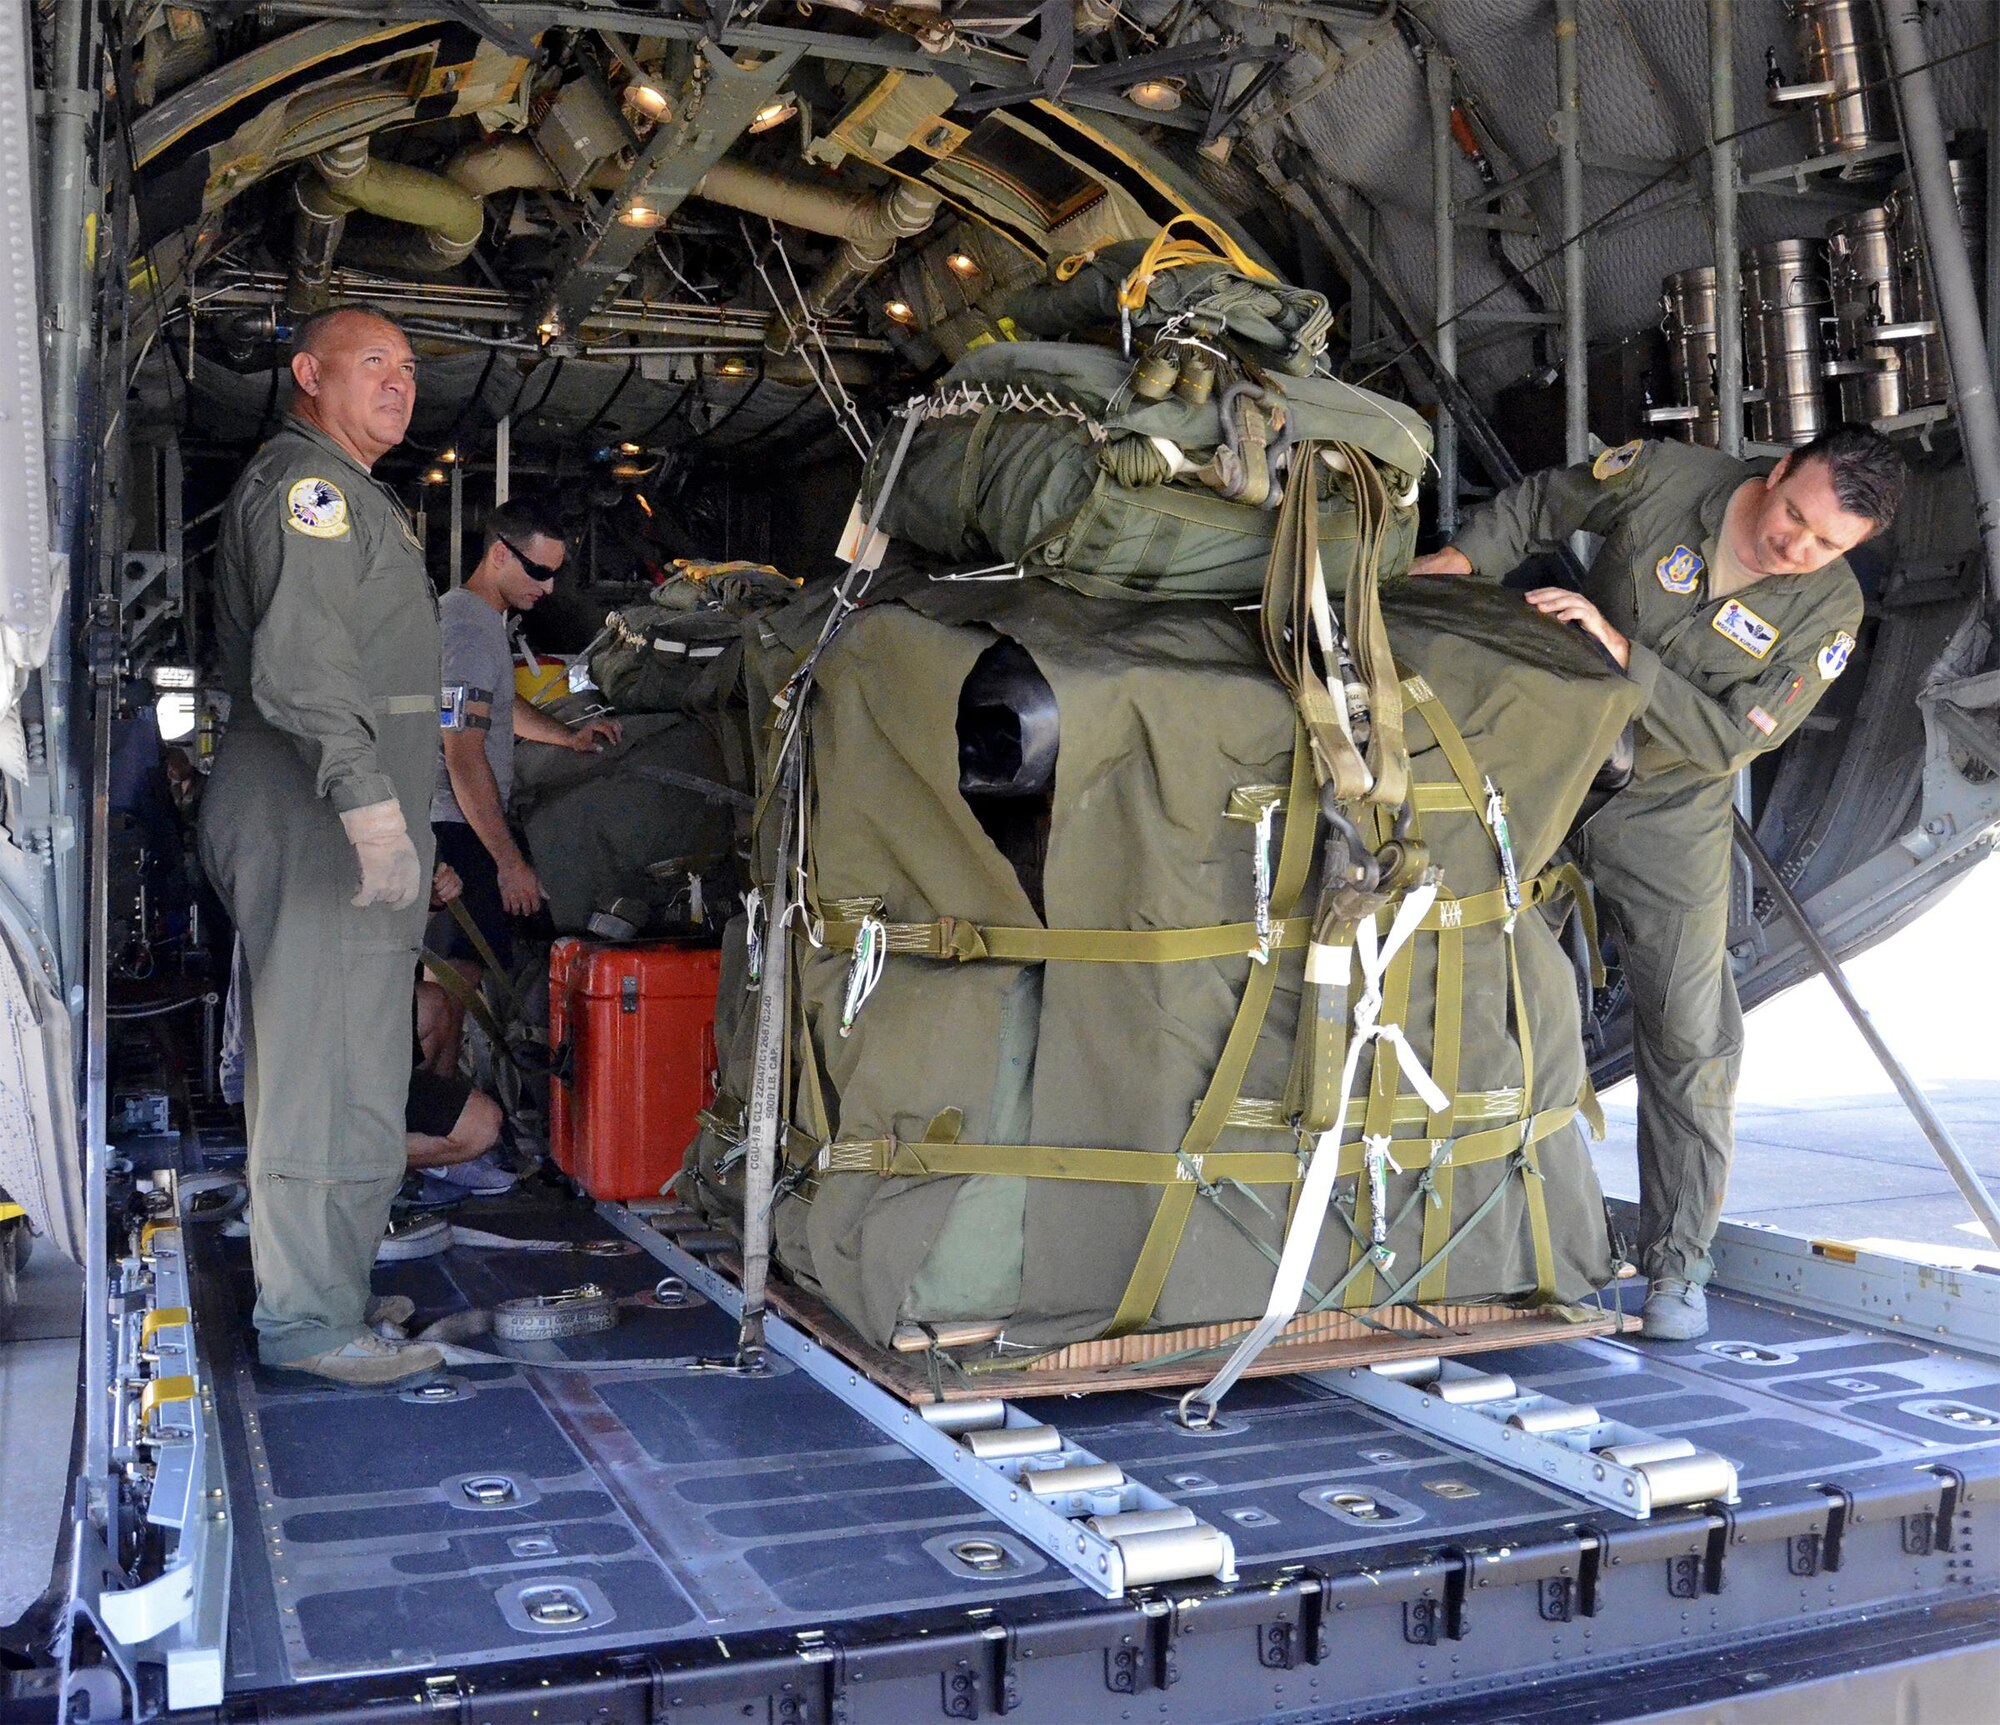 Loadmastsers with the 920th Rescue Wing inspect two RAMZ packs (Rigged Alternate Method Zodiac) in the back of a wing HC-130P/N King aircraft prior to a search-and-rescue mission. The packs each contain an inflatable Zodiac boat, an oxygen tank to inflate the boat, an outboard motor for the boat and medical equipment. When a survivor is spotted in the ocean, the RAMZ are pushed from the rear of the aircraft to parachute into the sea below. A team of pararescuemen follow, and once they’ve parachuted into the ocean, they assemble the RAMZ and use it to reach and rescue the survivor. (U.S. Air Force photo/Master Sgt. Paul Flipse) 